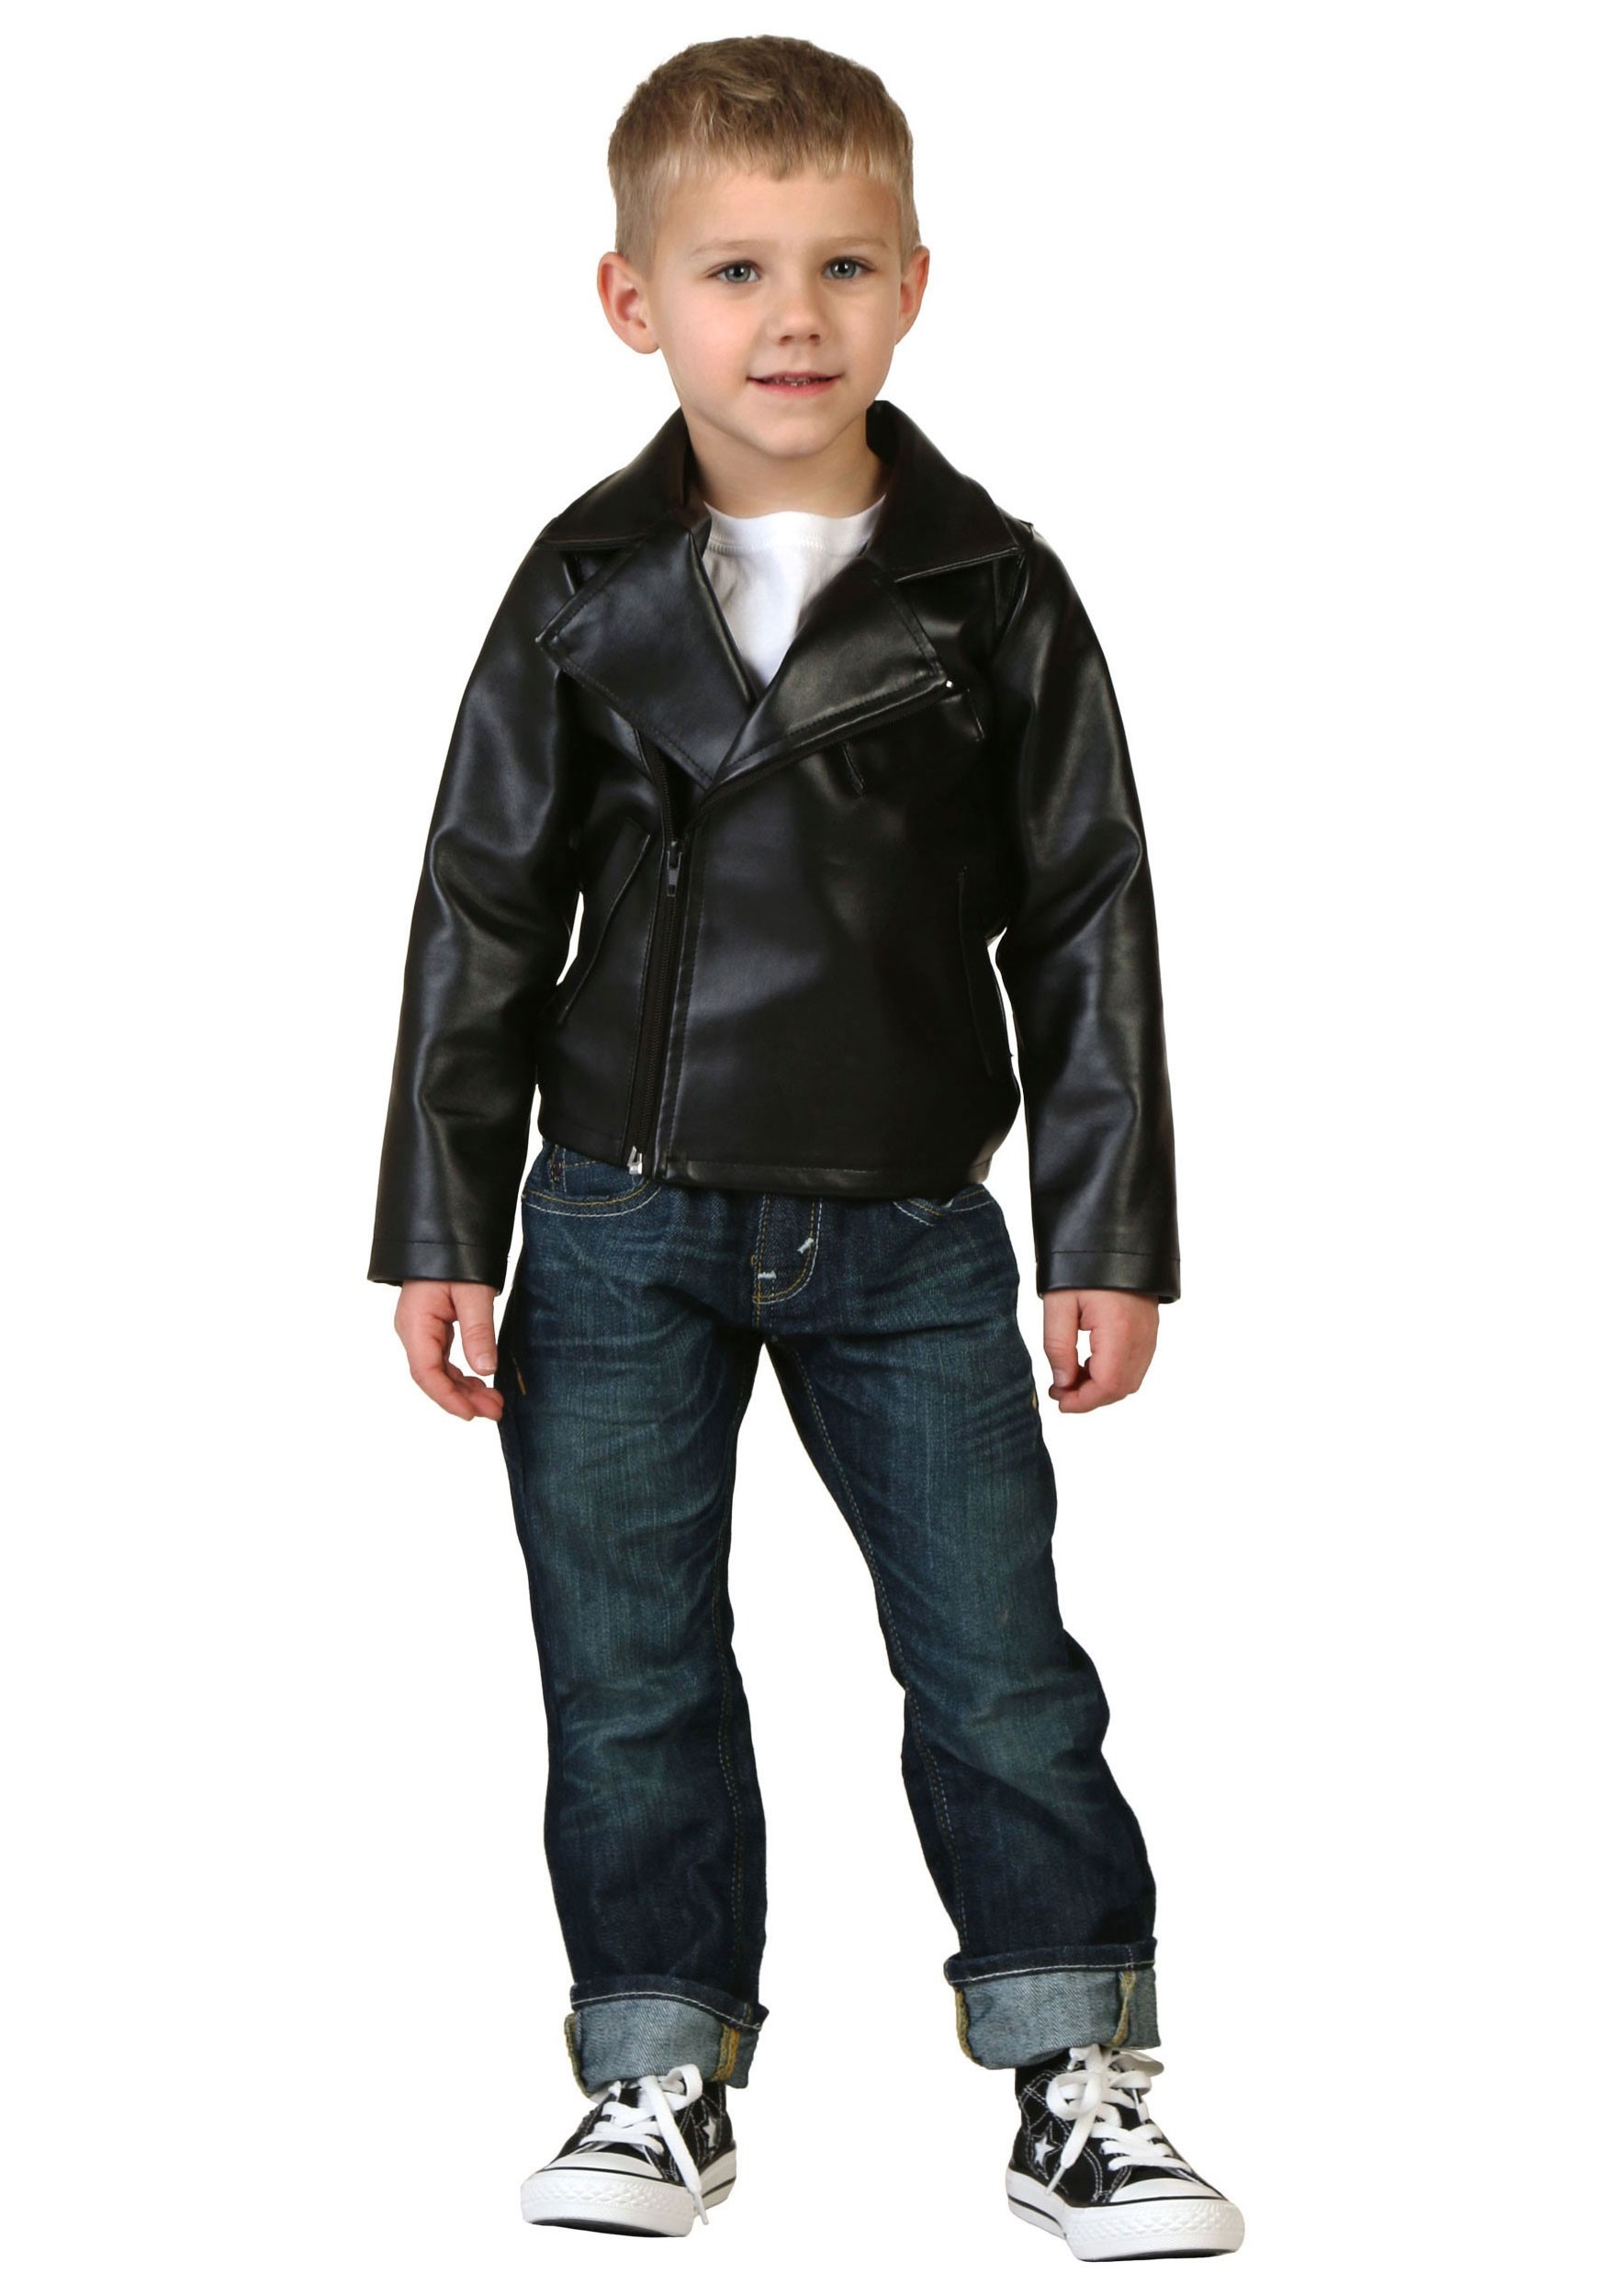 Photos - Fancy Dress Toddler FUN Costumes  Grease T-Birds Jacket Costume | Officially licensed c 